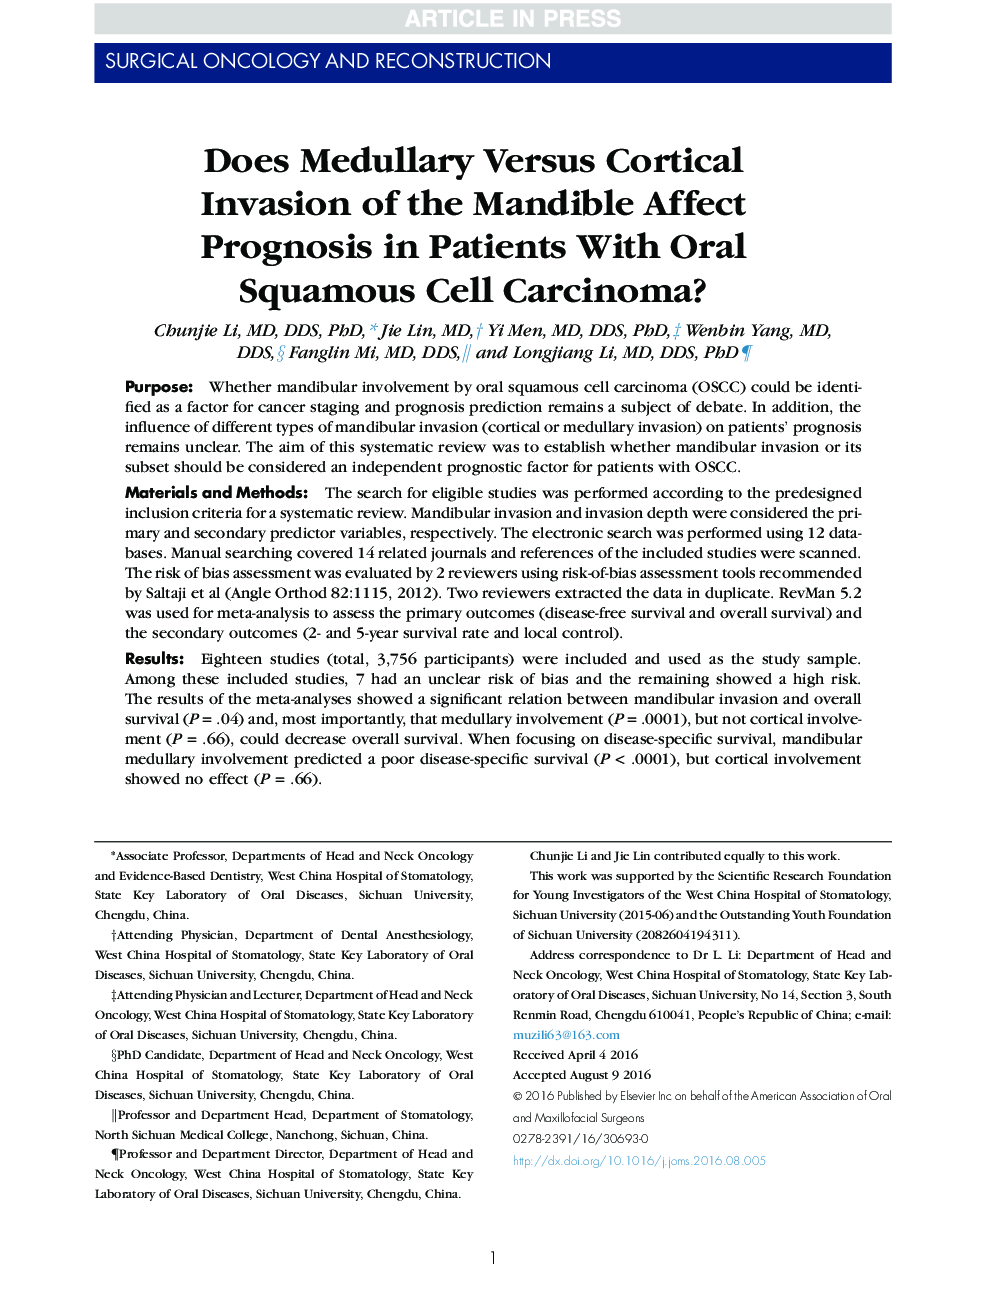 Does Medullary Versus Cortical Invasion of the Mandible Affect Prognosis in Patients With Oral Squamous Cell Carcinoma?